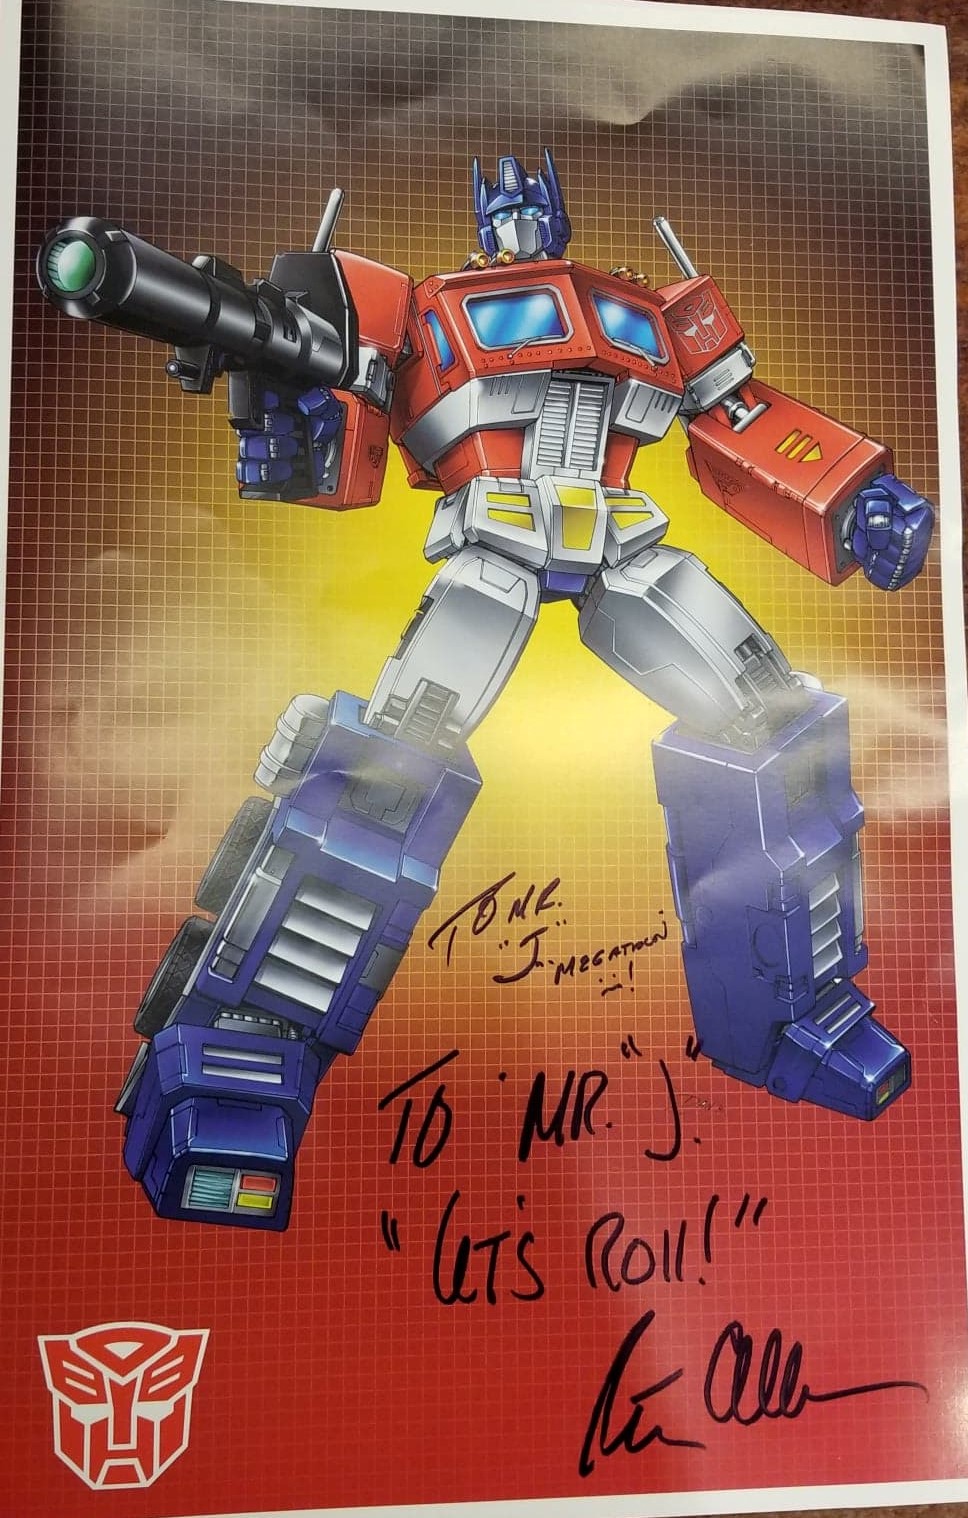 Transformers (Autographed Optimus Prime poster by voice actor Peter Cullen)